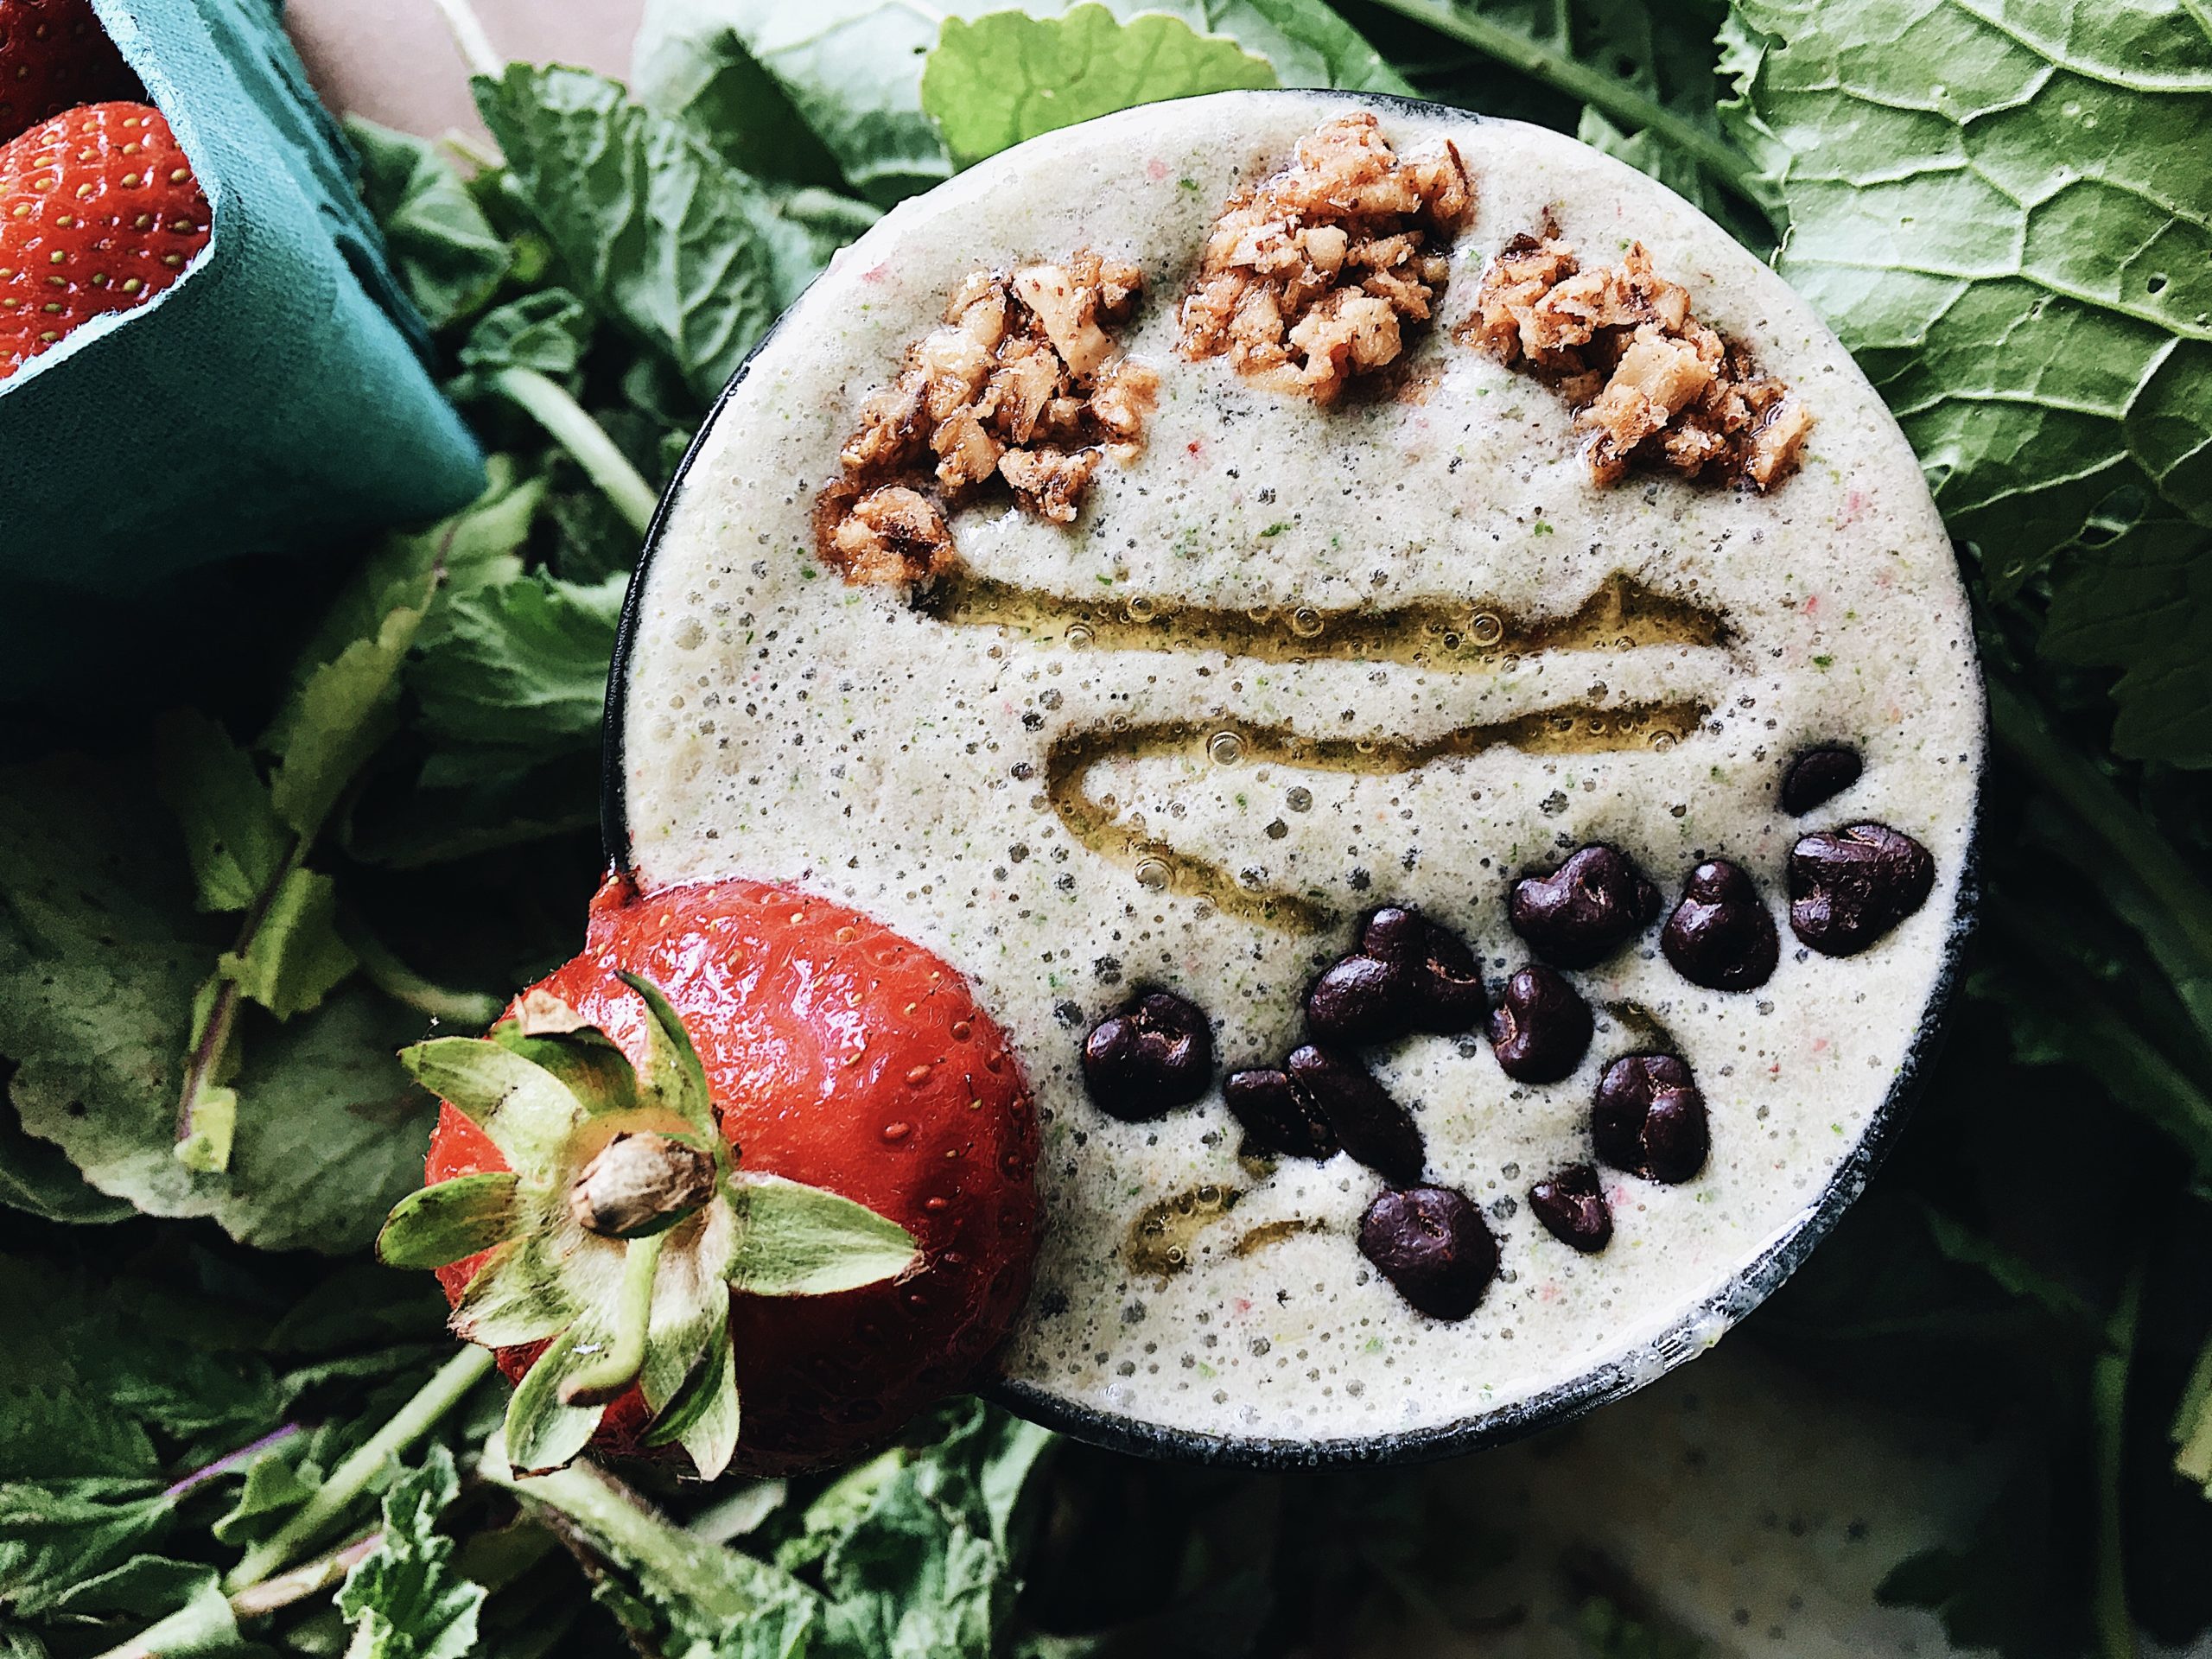 Root Vegetable Greens and Strawberry Smoothie. Recipe by Alysha Melnyk with Taproot Farm, PA.